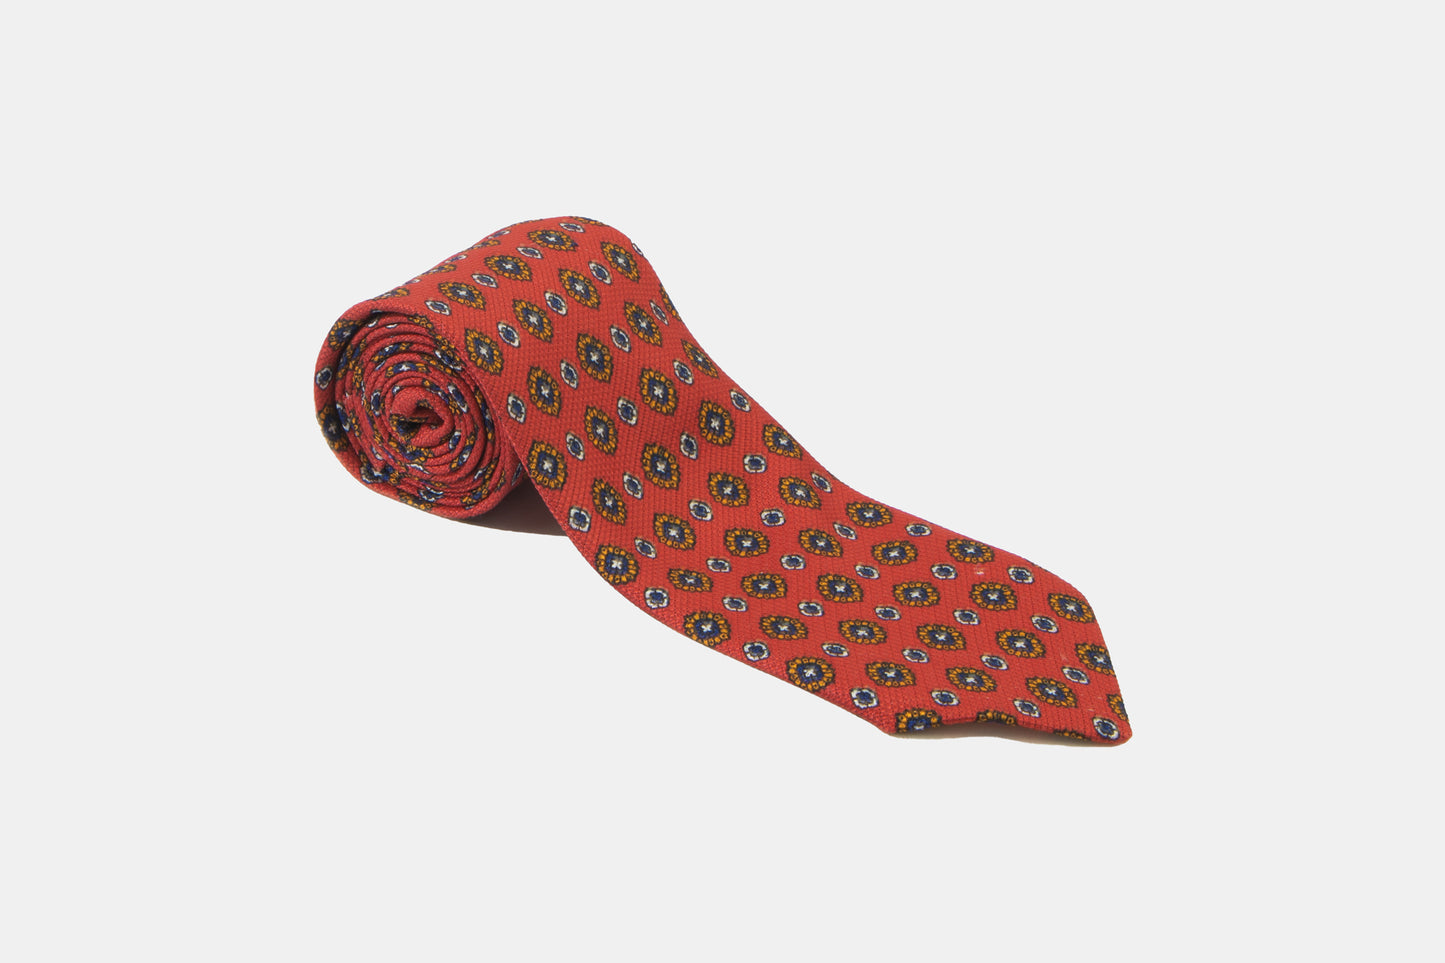 khakis of Carmel - silk red tie with floral pattern